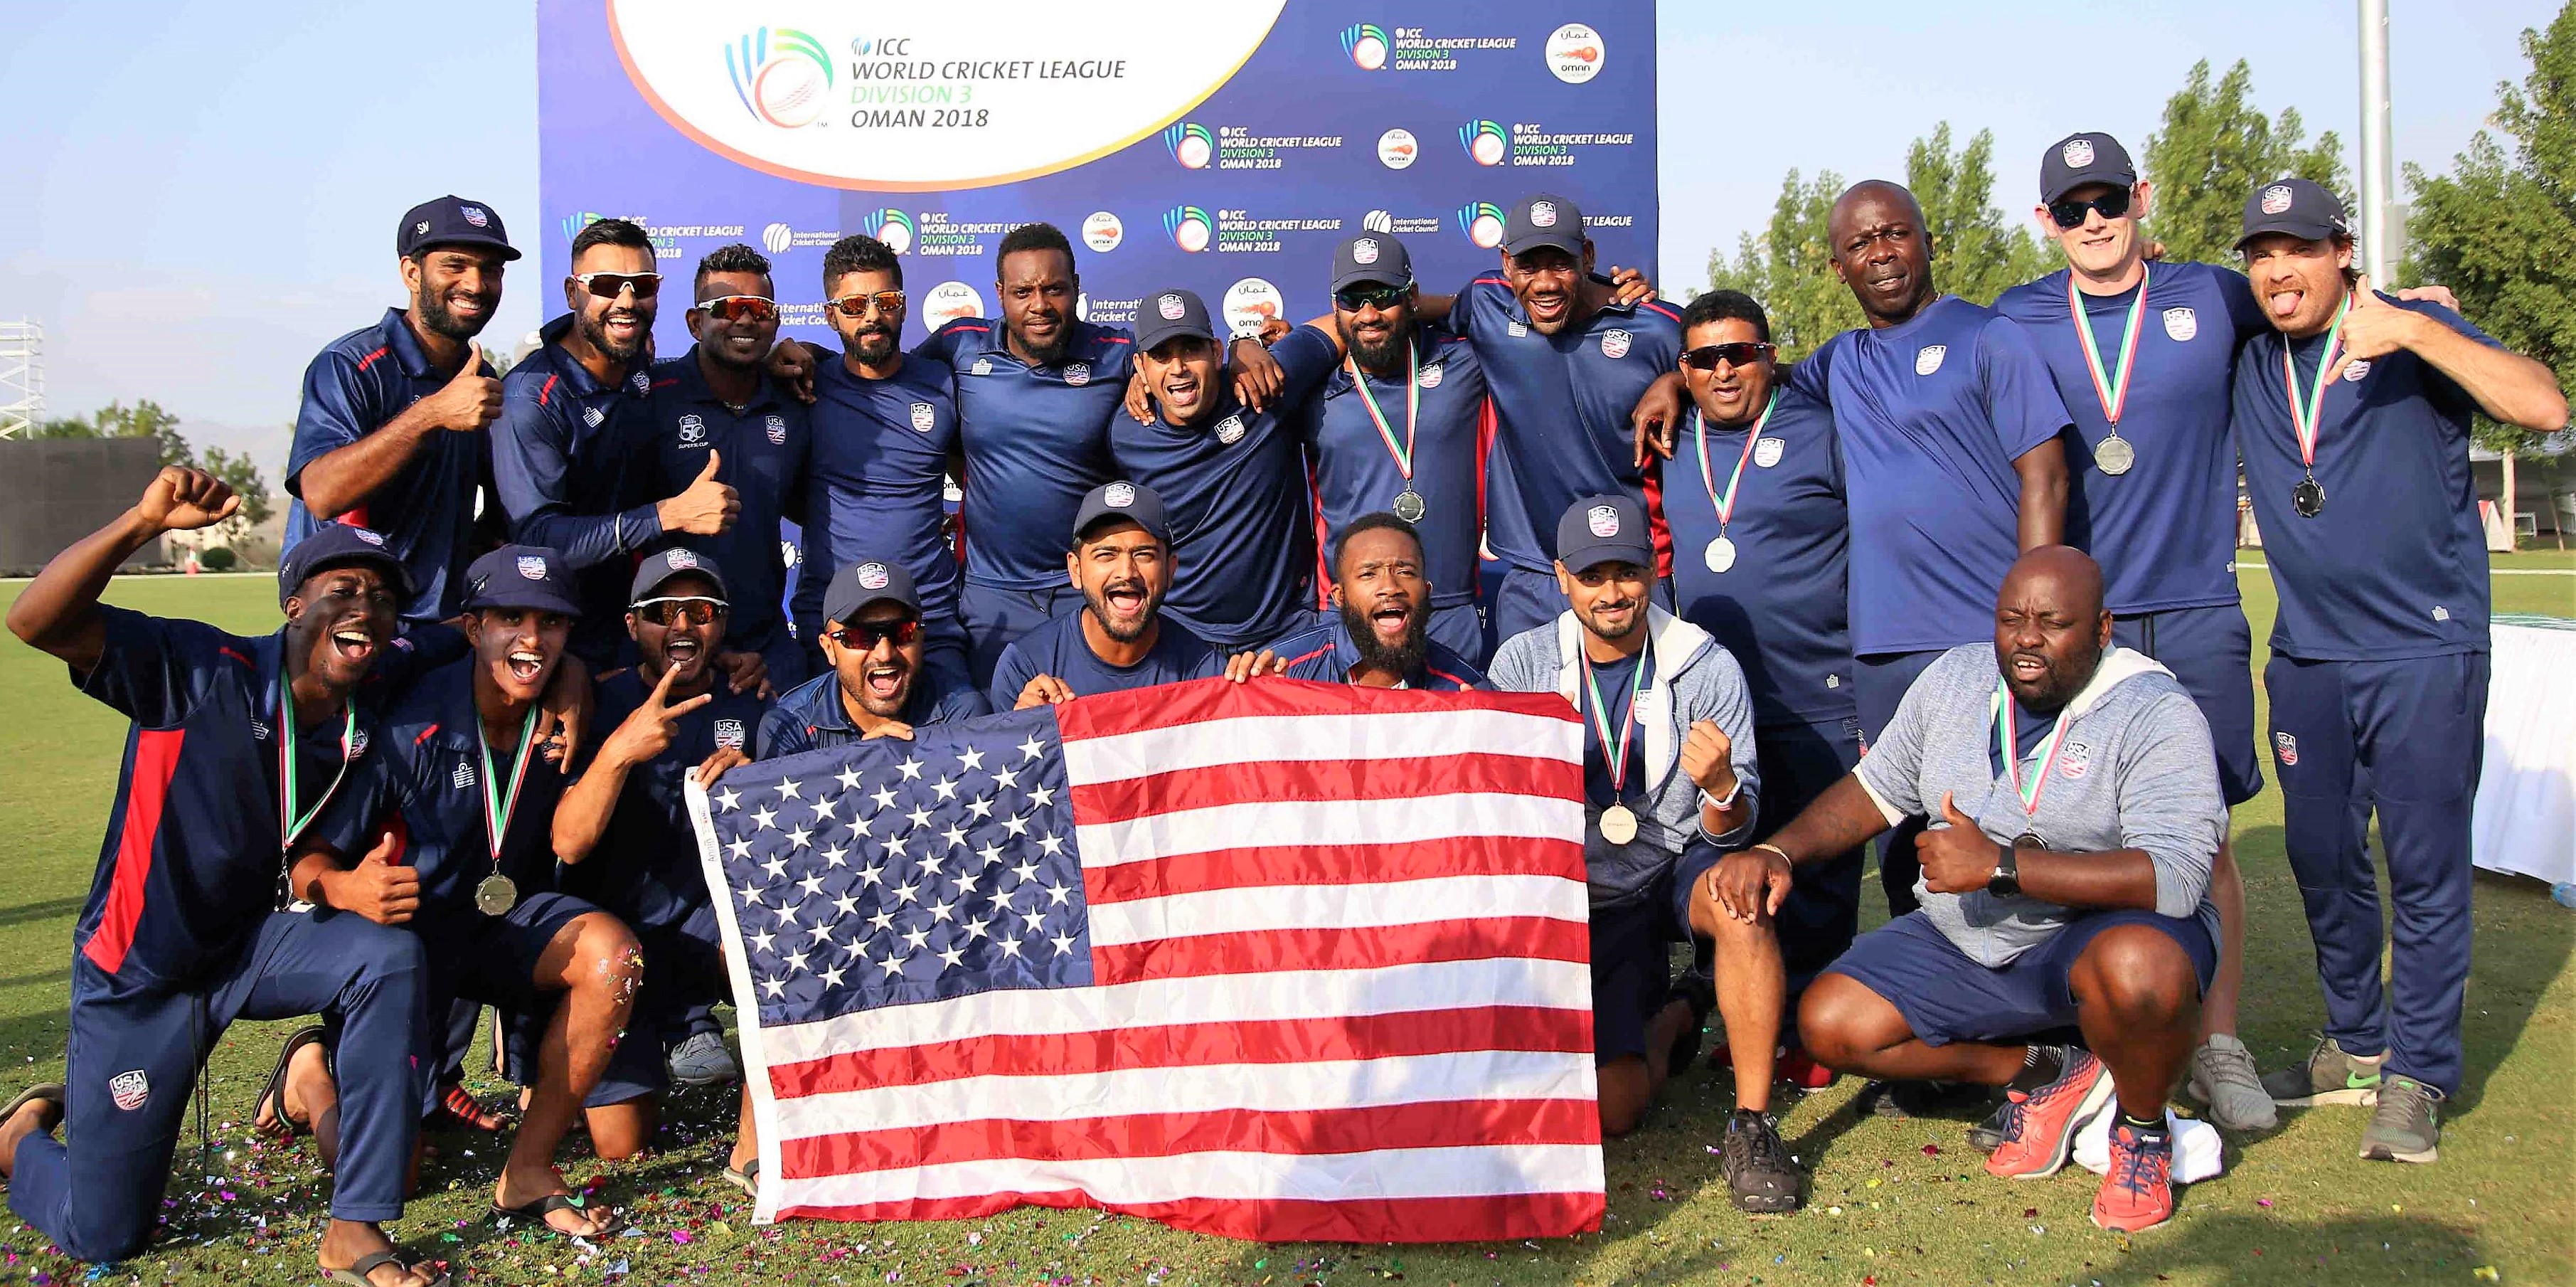 USA beat Singapore to gain historic promotion to WCL2